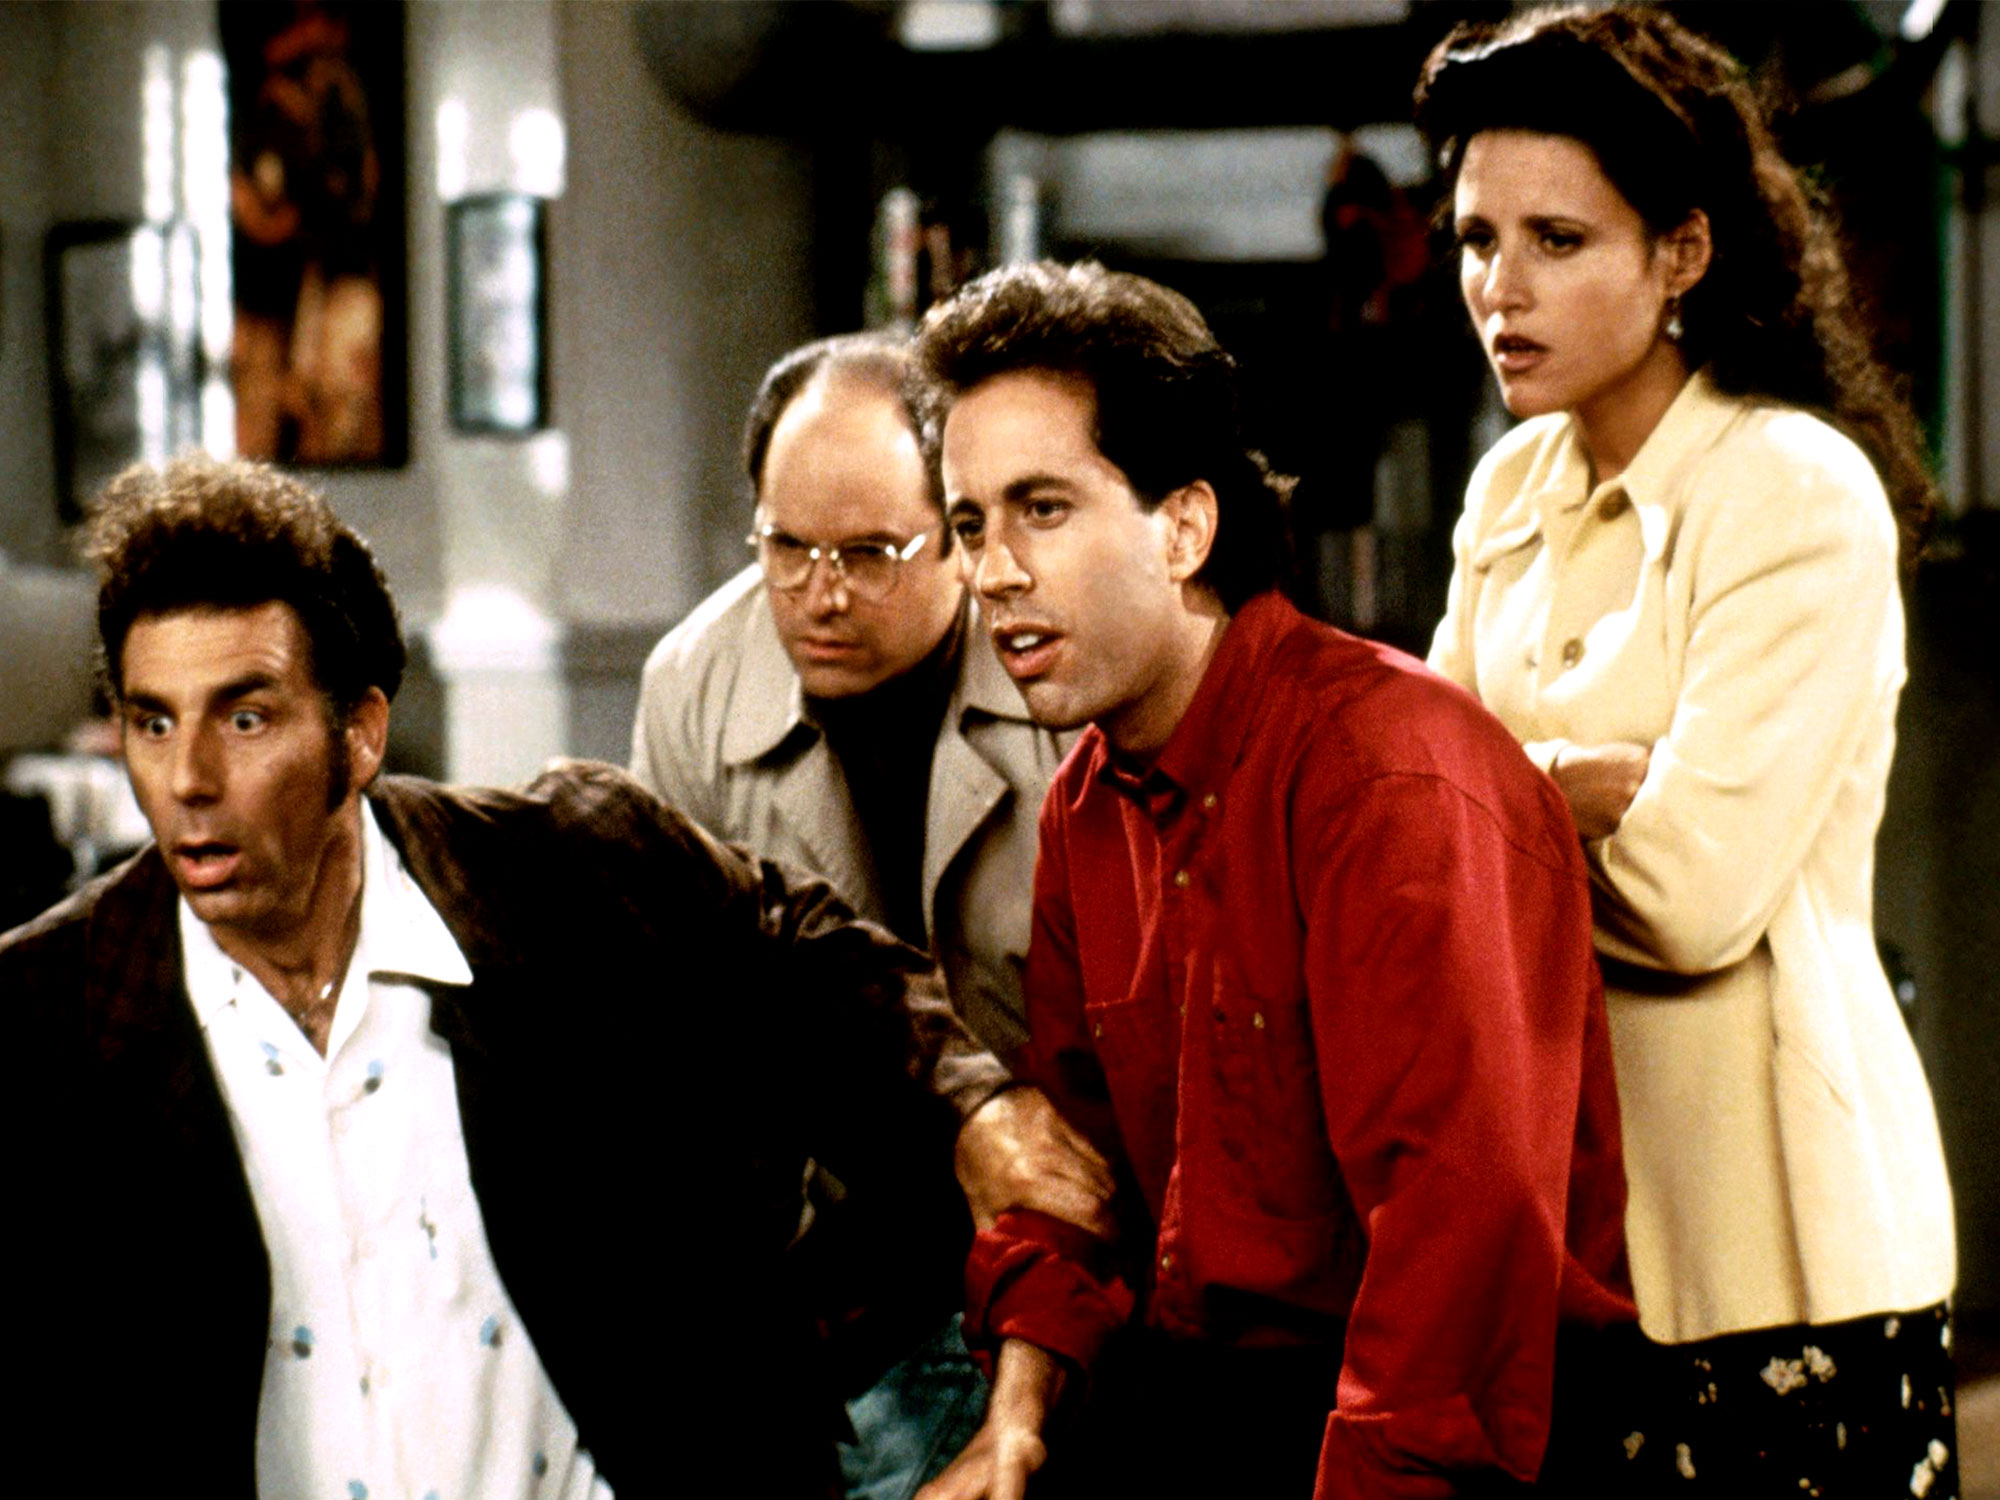 Seinfeld at 30 – The show about nothing that changed everything